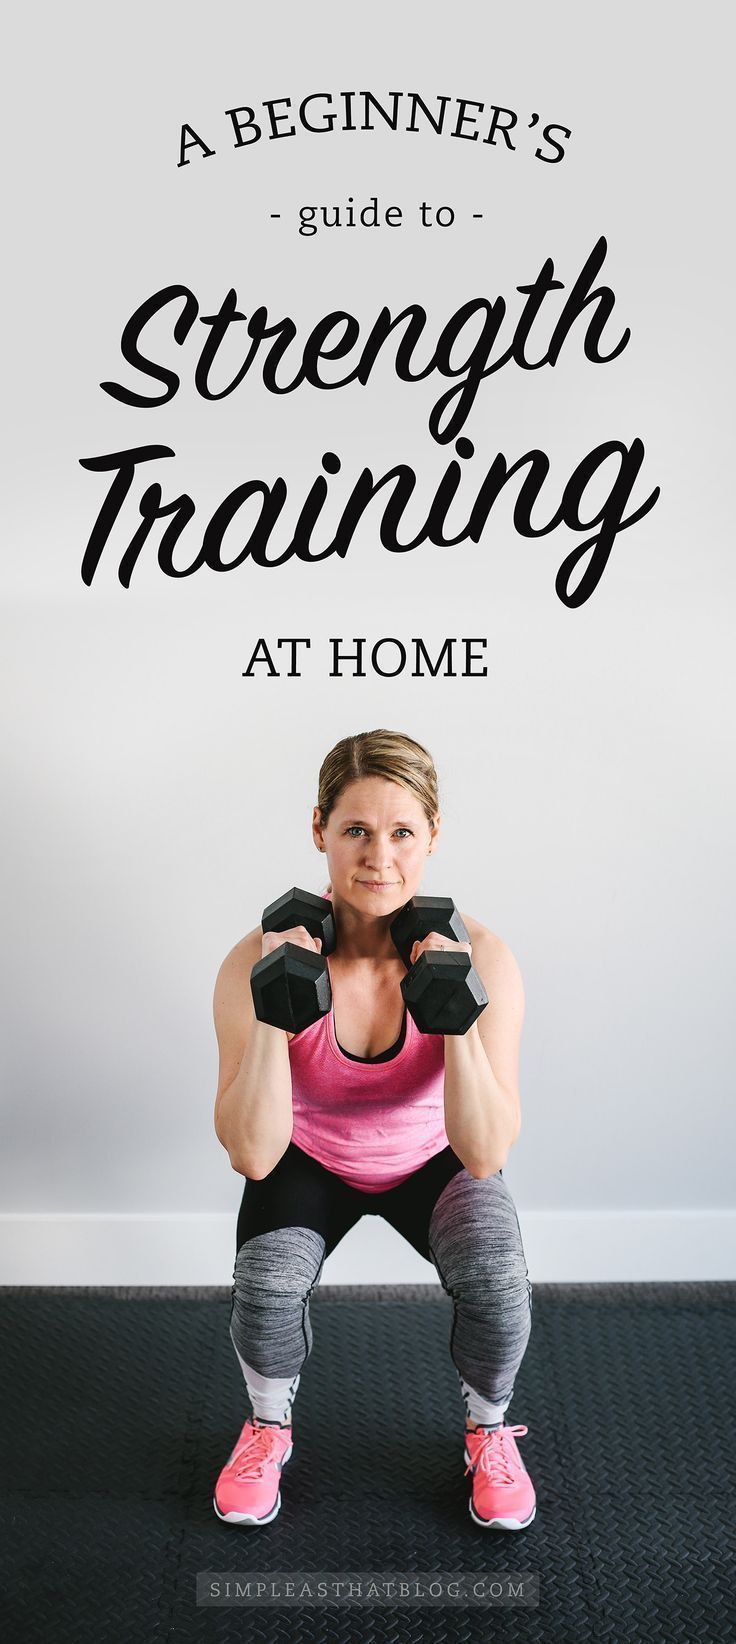 A Beginner's Guide to Strength Training at Home -   7 fitness Body simple ideas